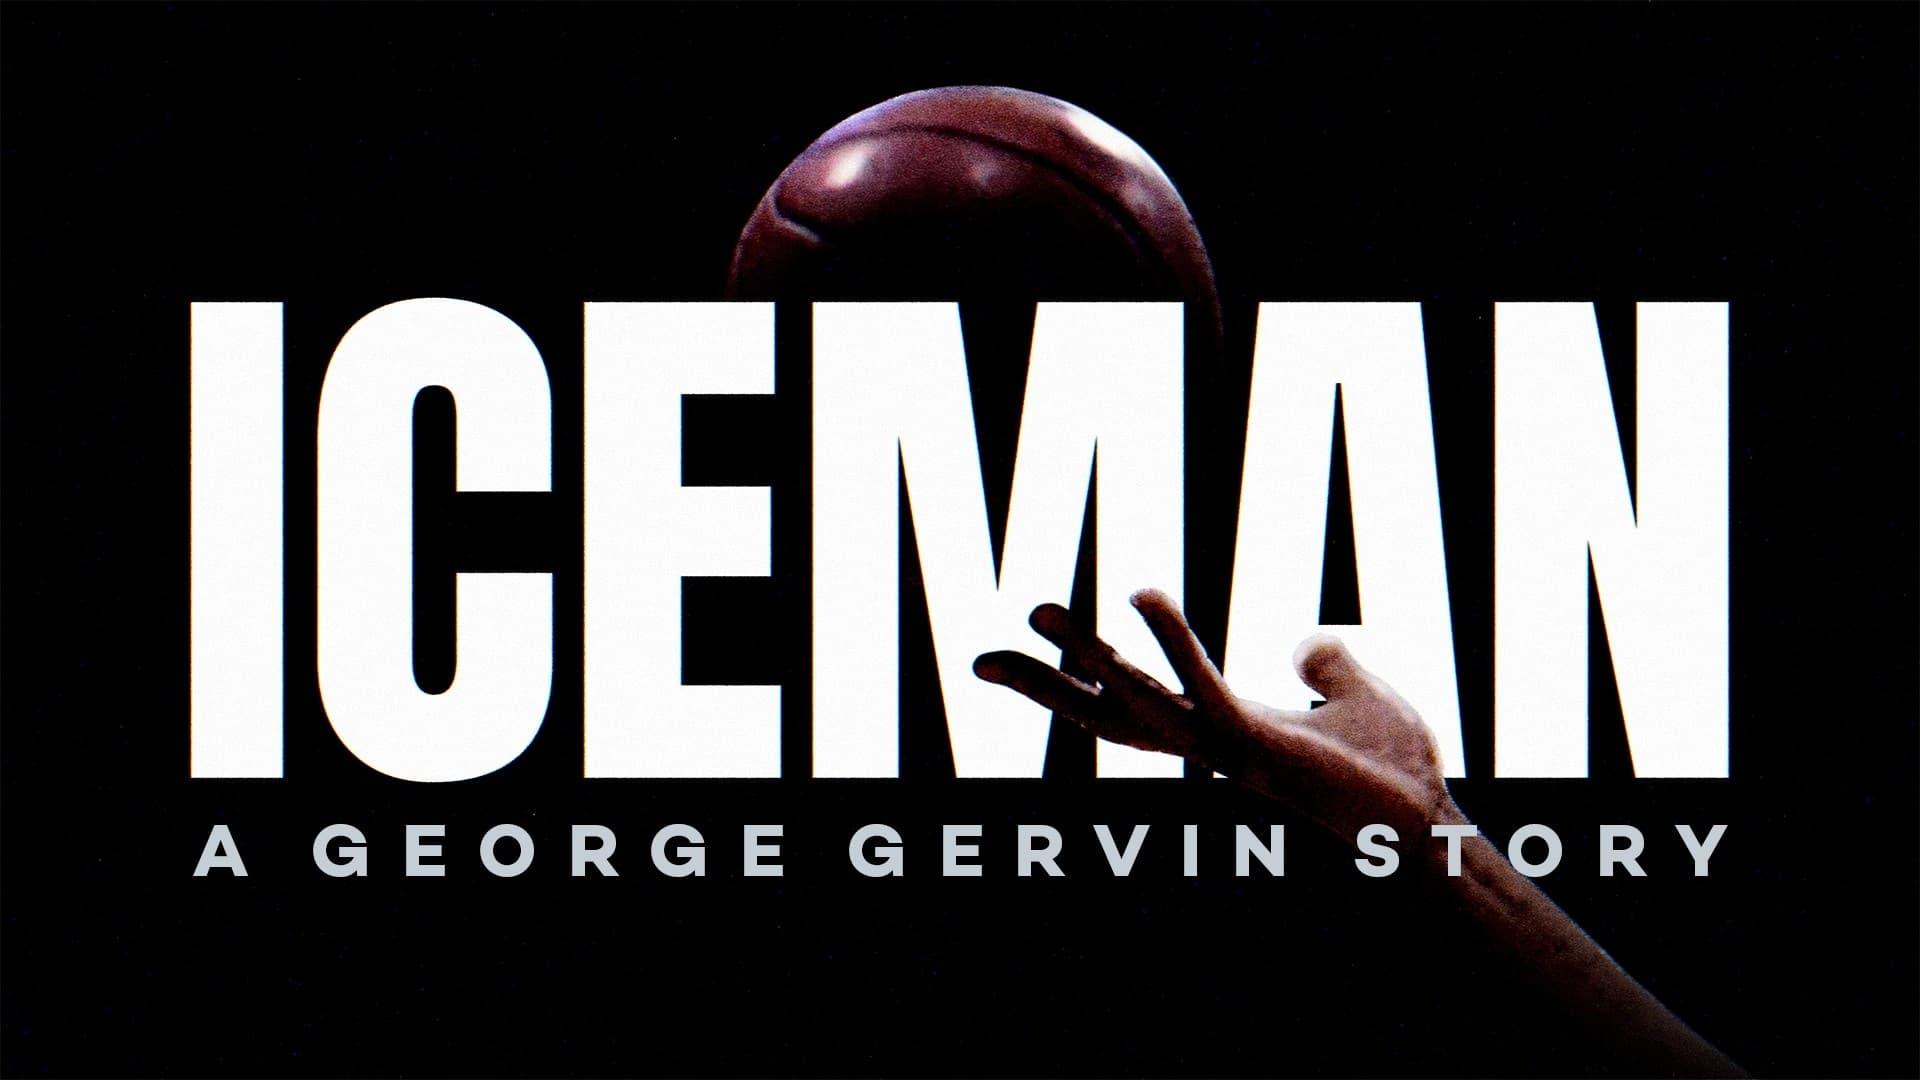 Iceman: A George Gervin Story backdrop